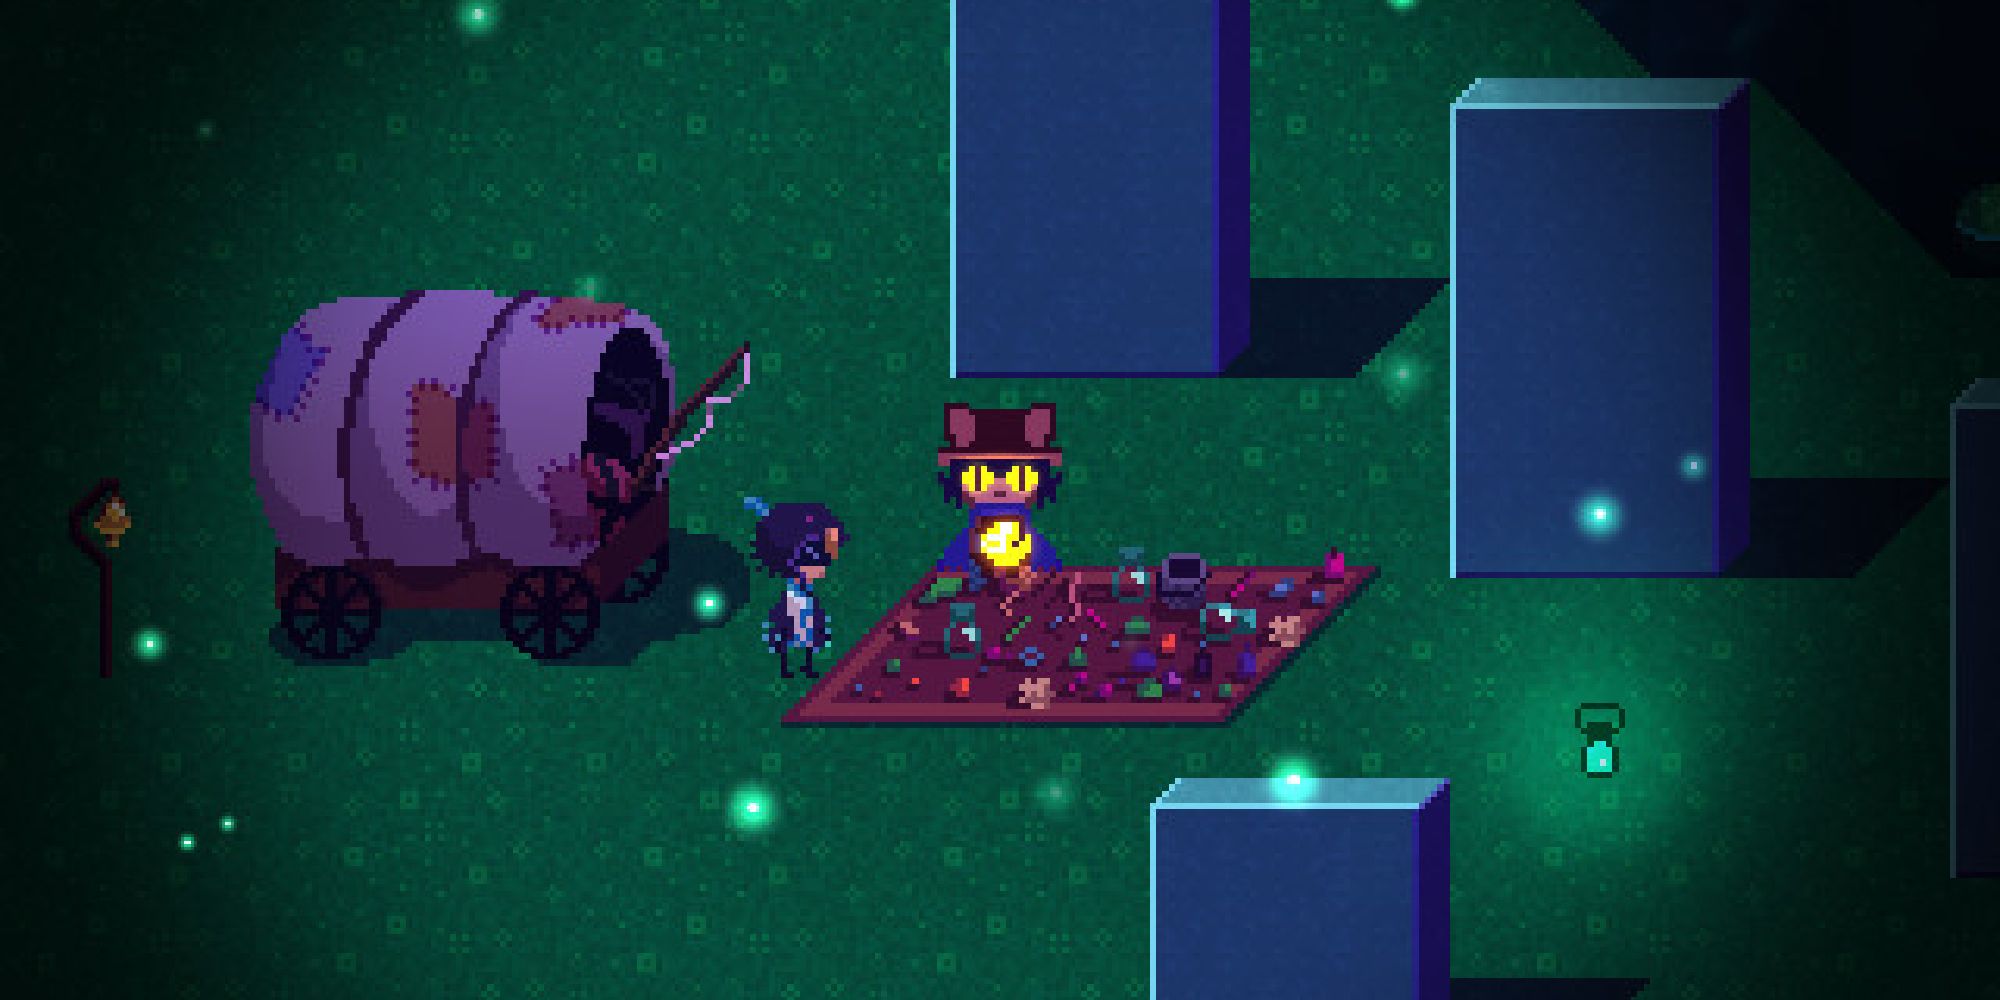 The overworld in OneShot showing Niko making a camp at night